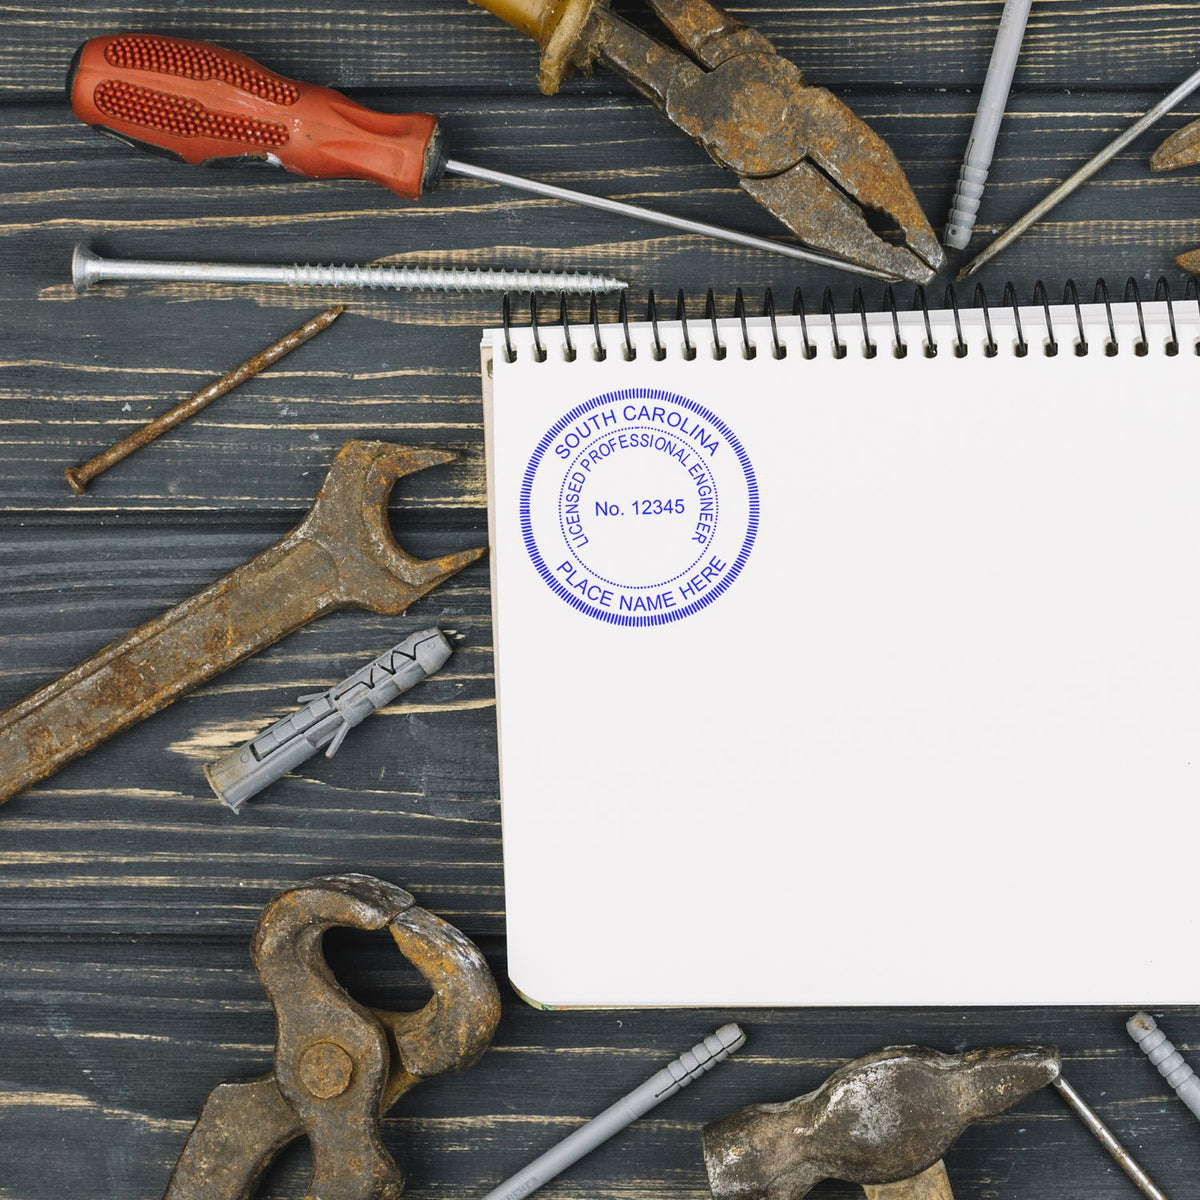 A stamped impression of the South Carolina Professional Engineer Seal Stamp in this stylish lifestyle photo, setting the tone for a unique and personalized product.